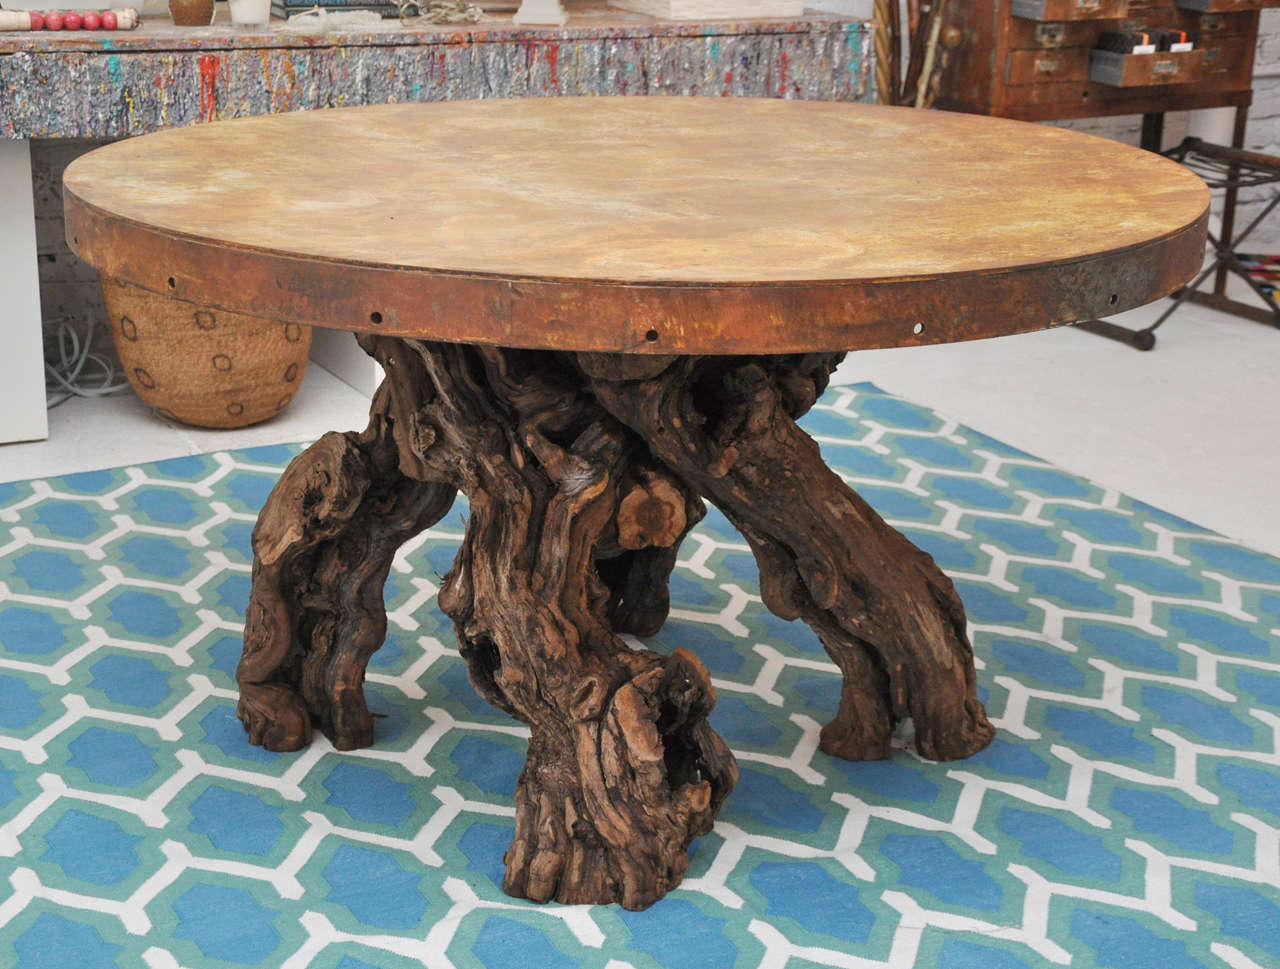 One of a kind root base table with copper top. Truly a conversation piece!